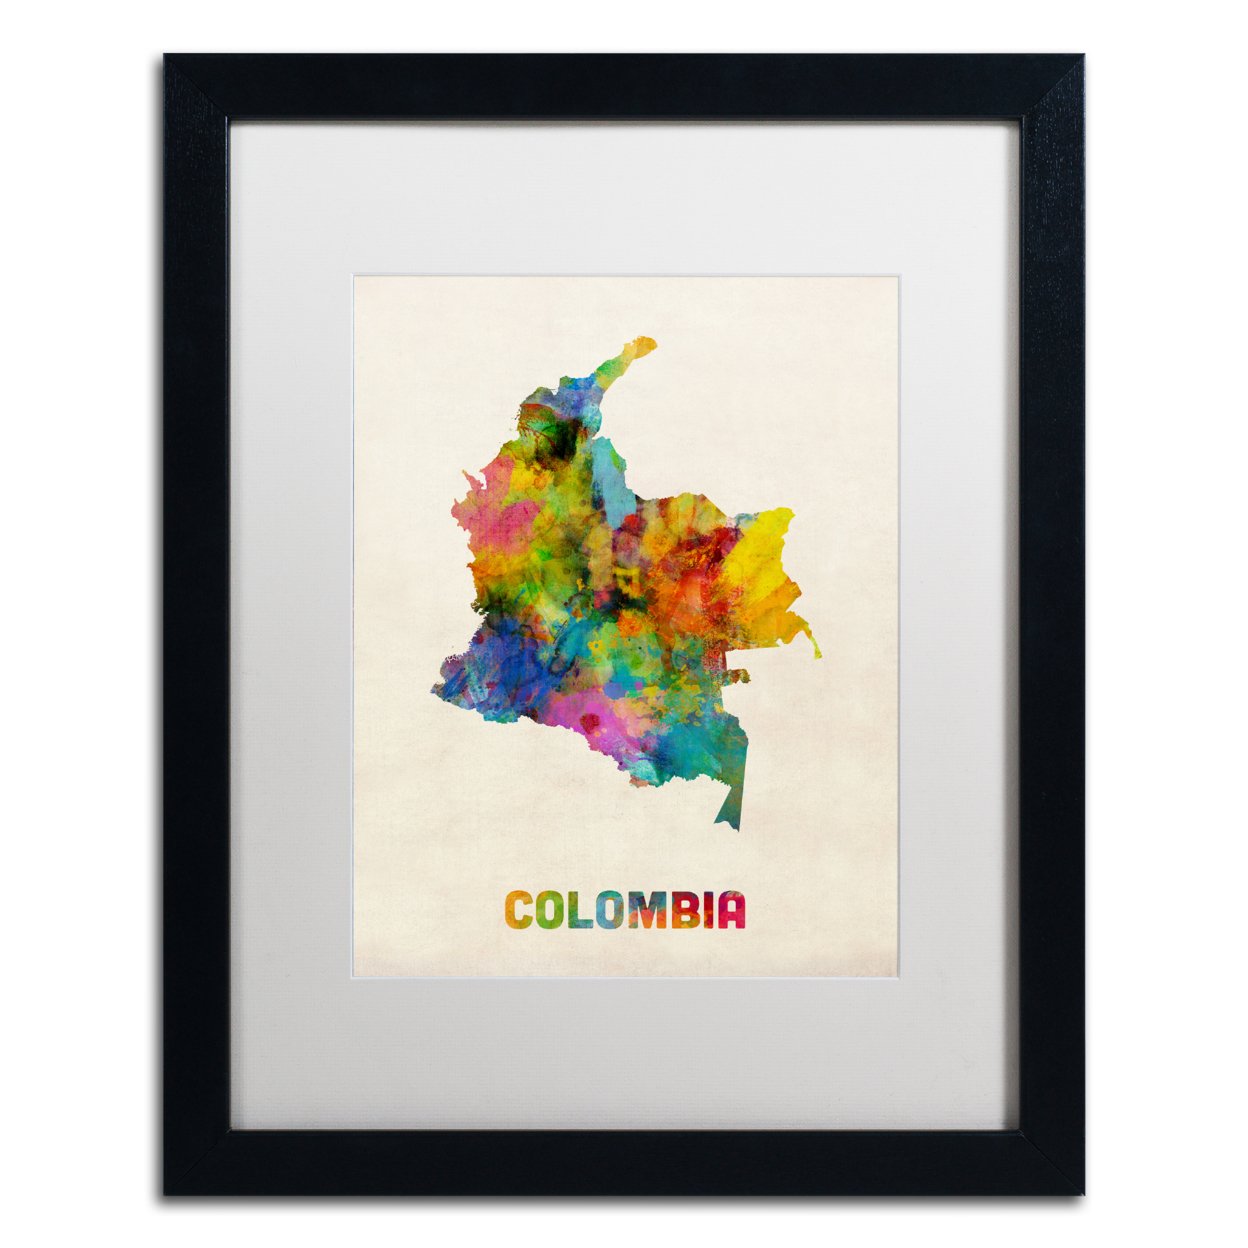 Michael Tompsett 'Colombia Watercolor Map' Black Wooden Framed Art 18 X 22 Inches